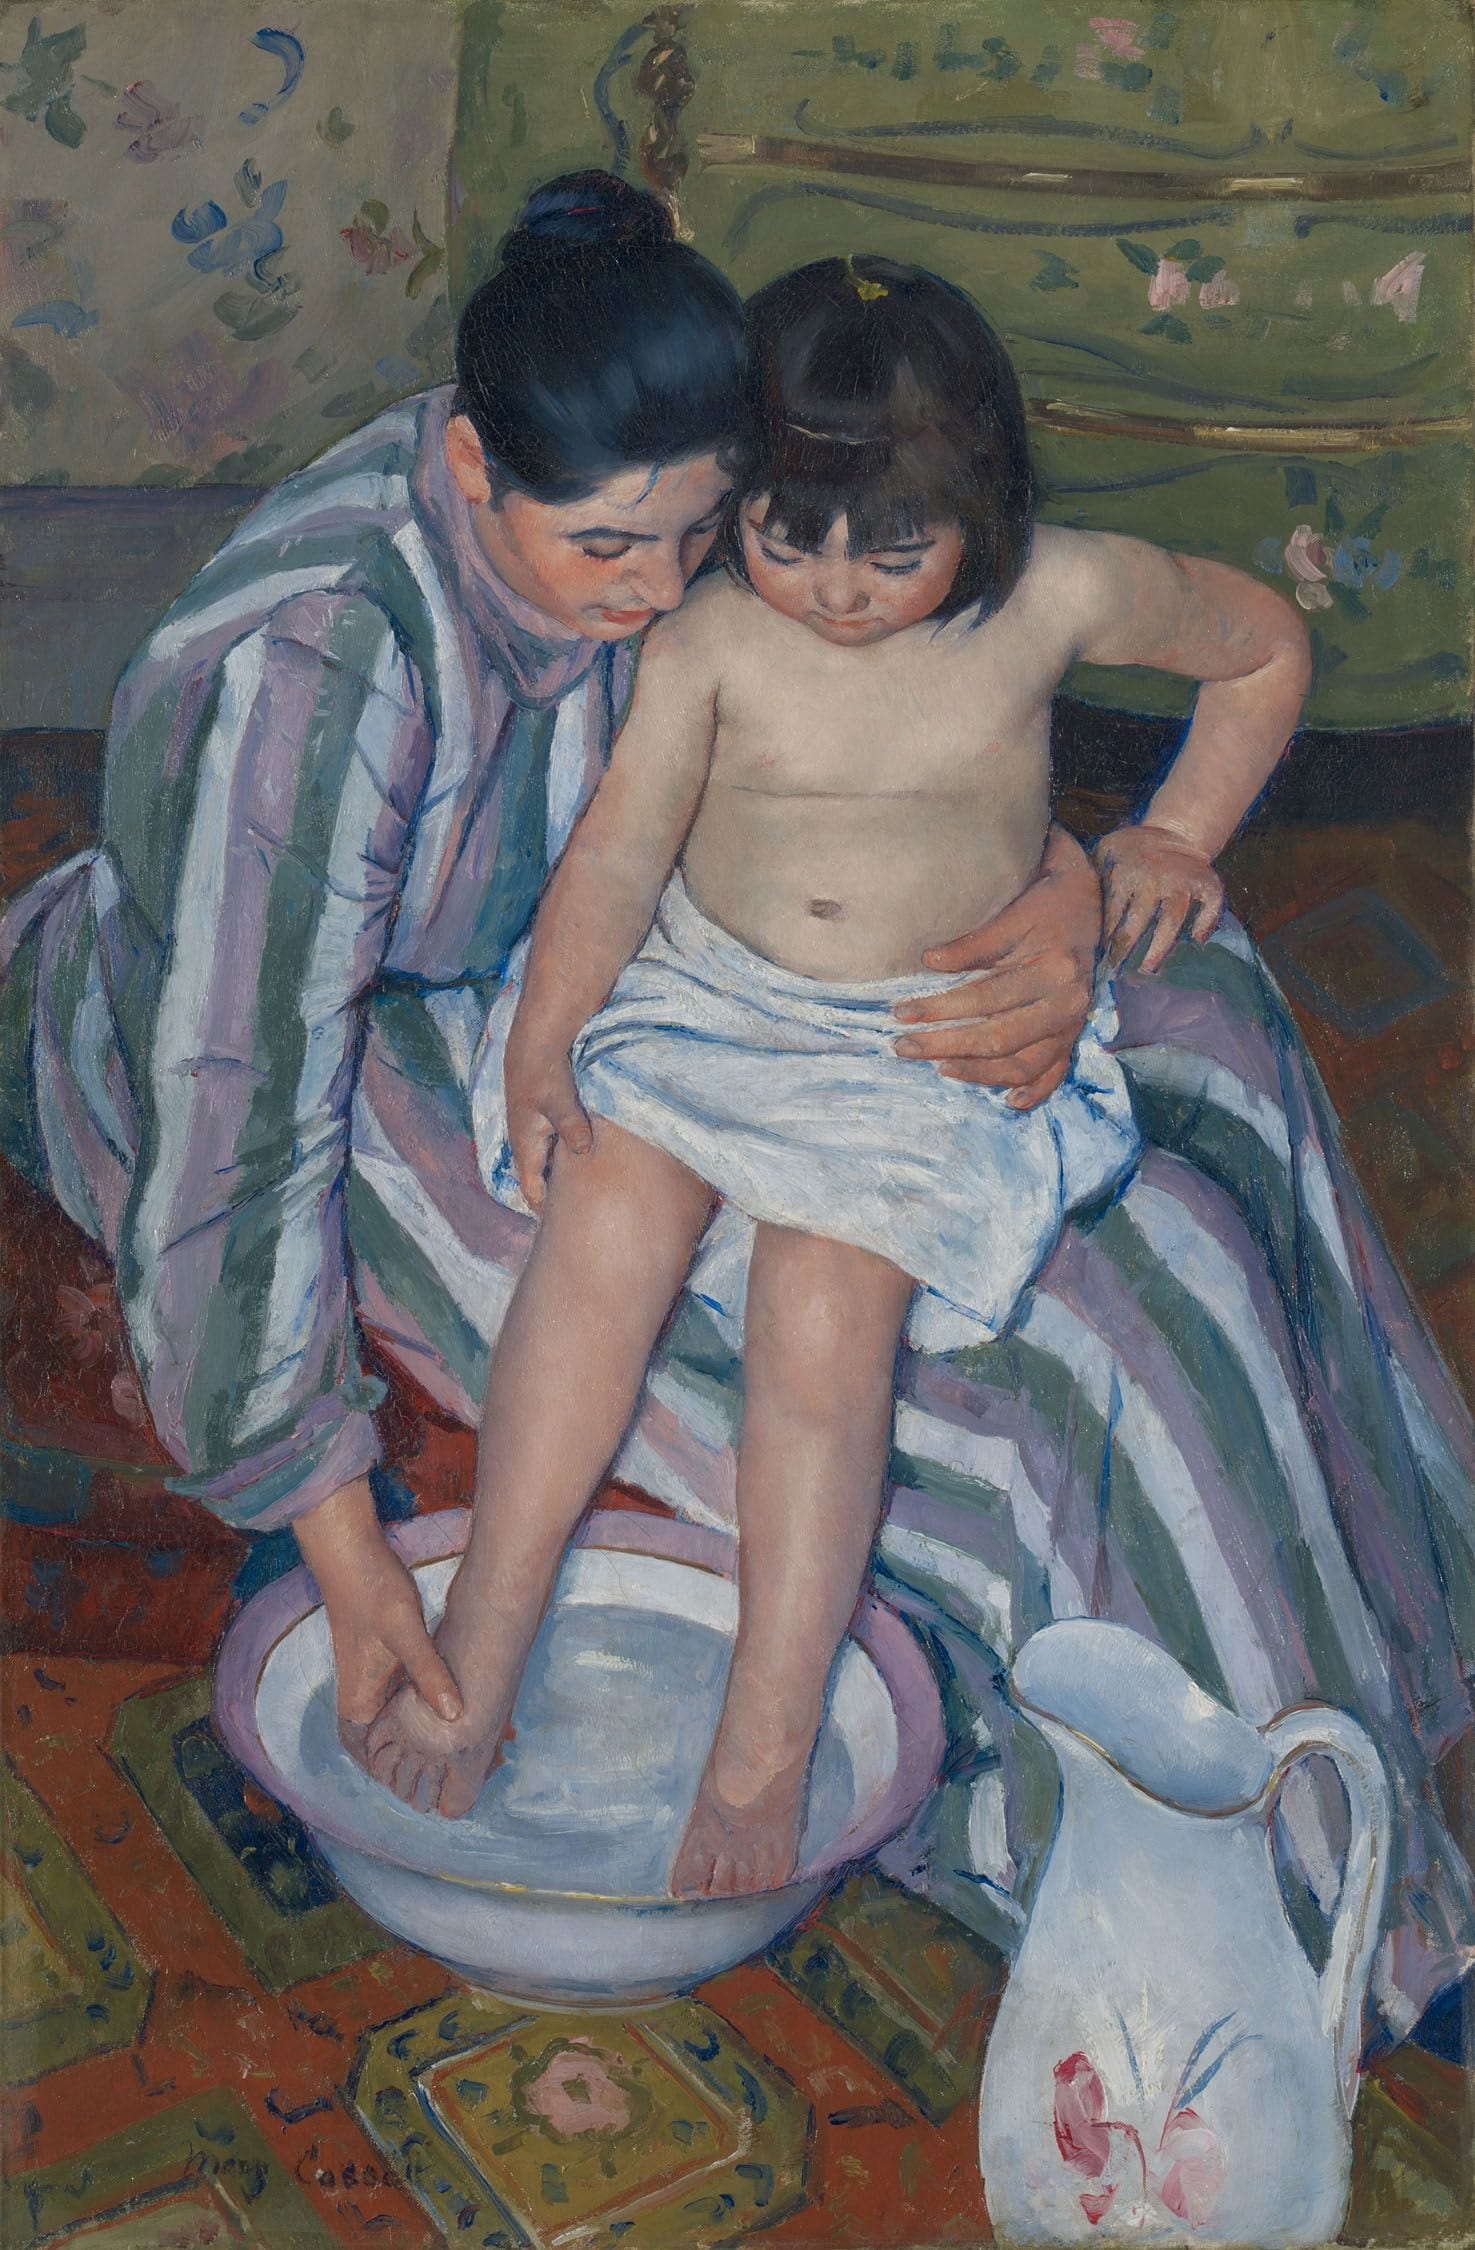 The Childs Bath by Mary Cassatt 1893 @ The Art Institute of Chicago